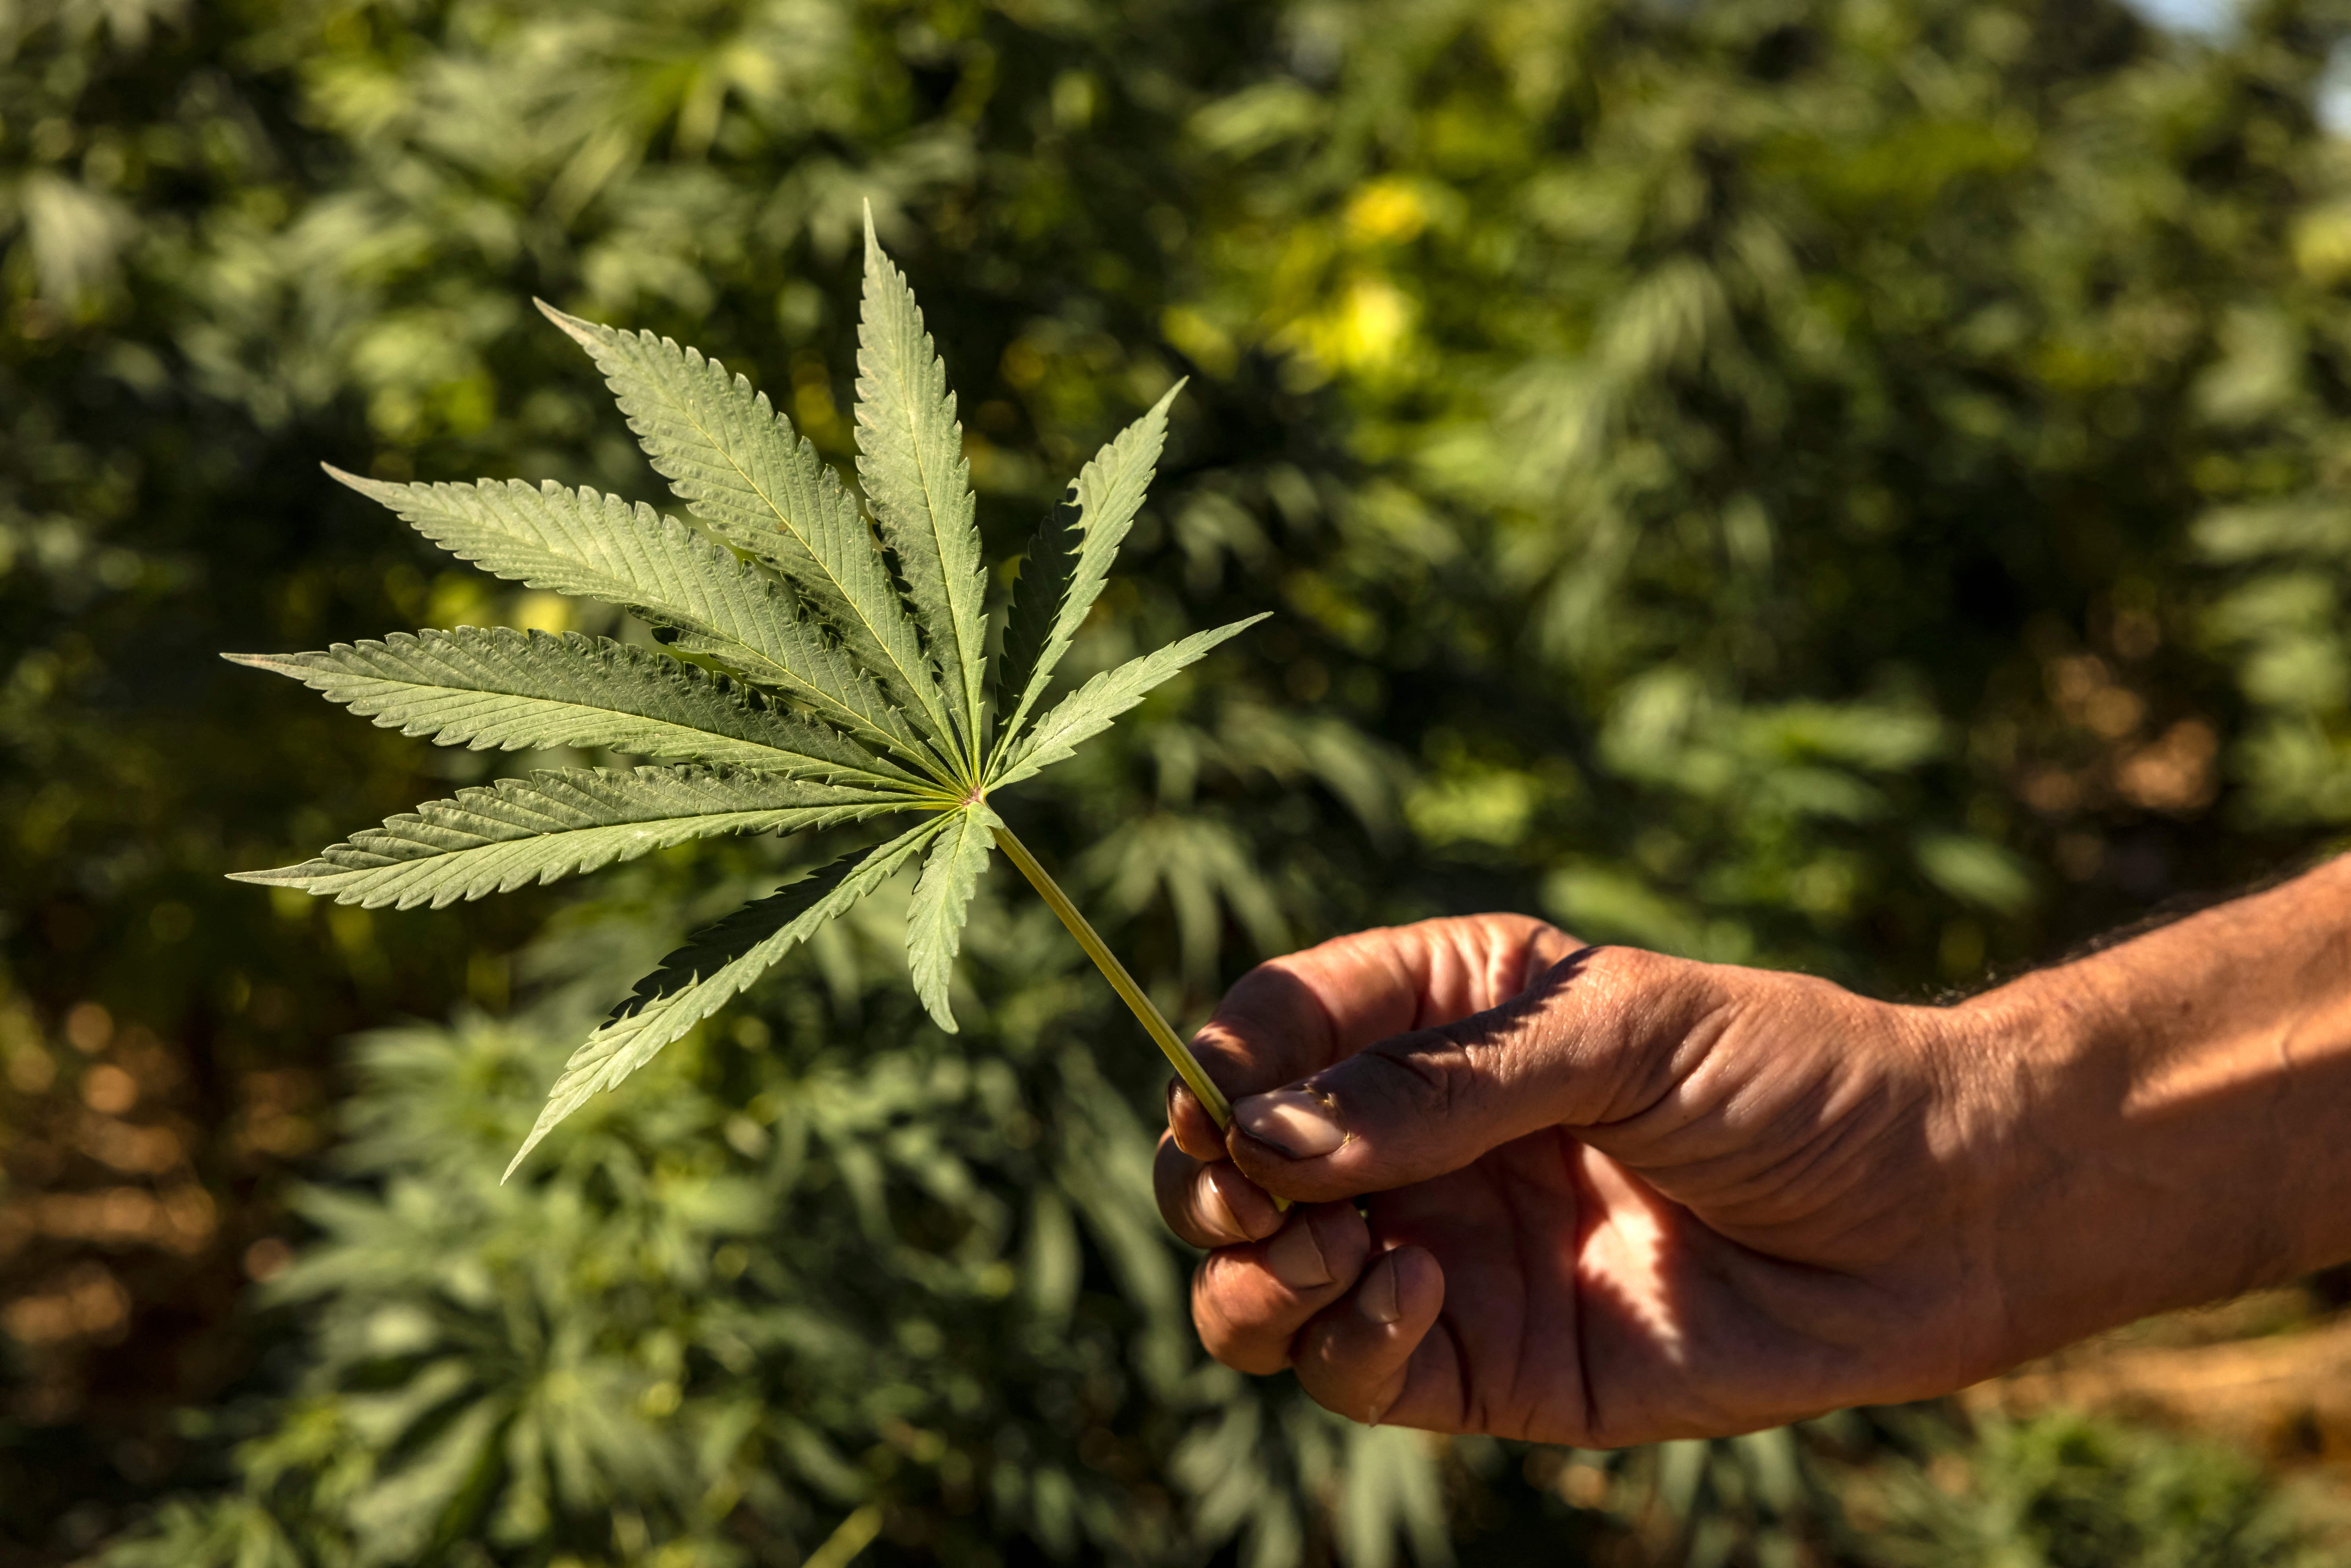 Hand holding a single cannabis leaf with other plants in the background